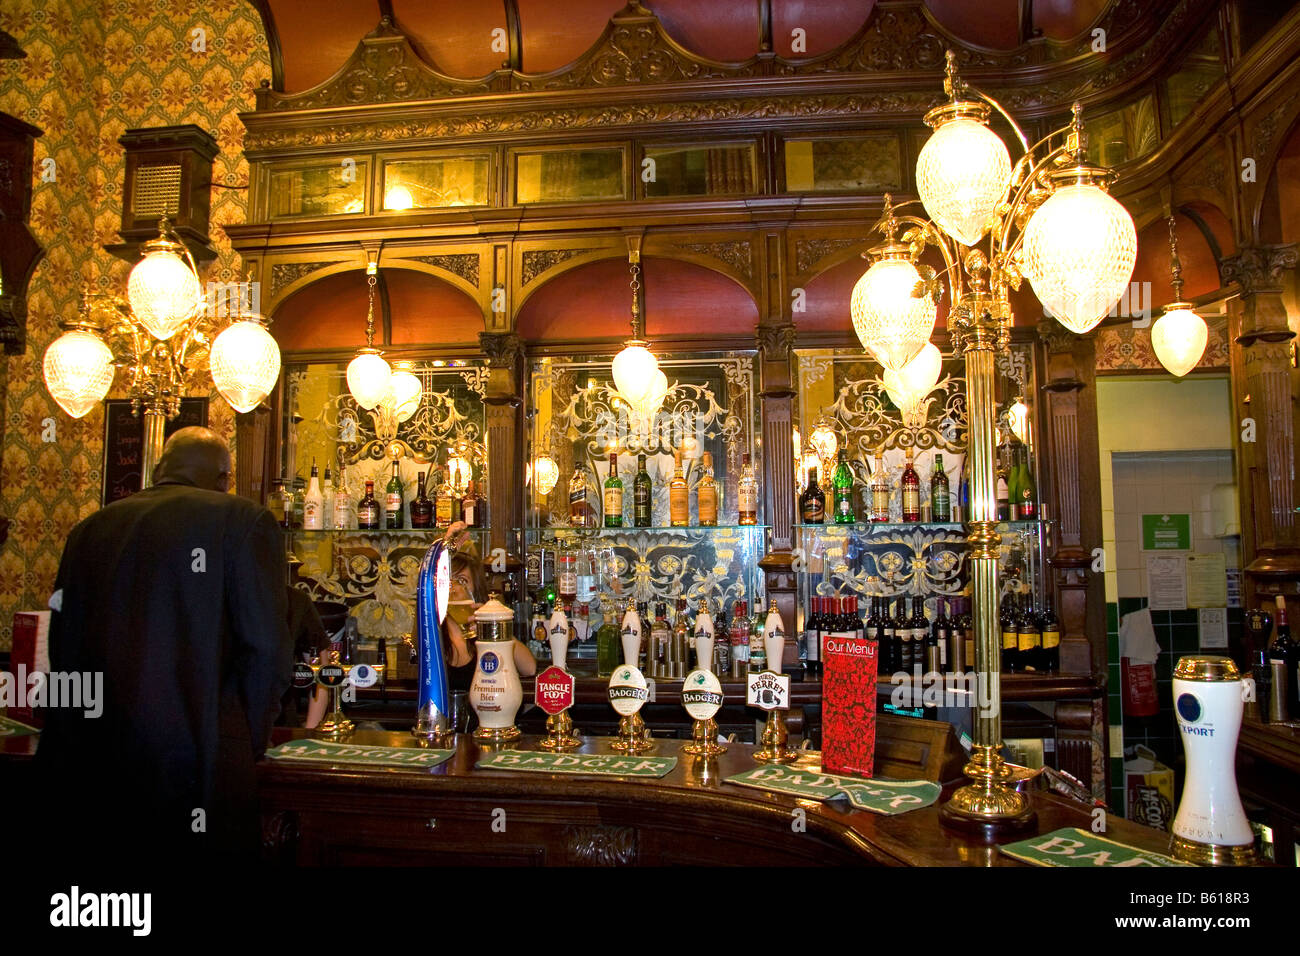 Interior of the St Stephens Tavern in London England Stock Photo